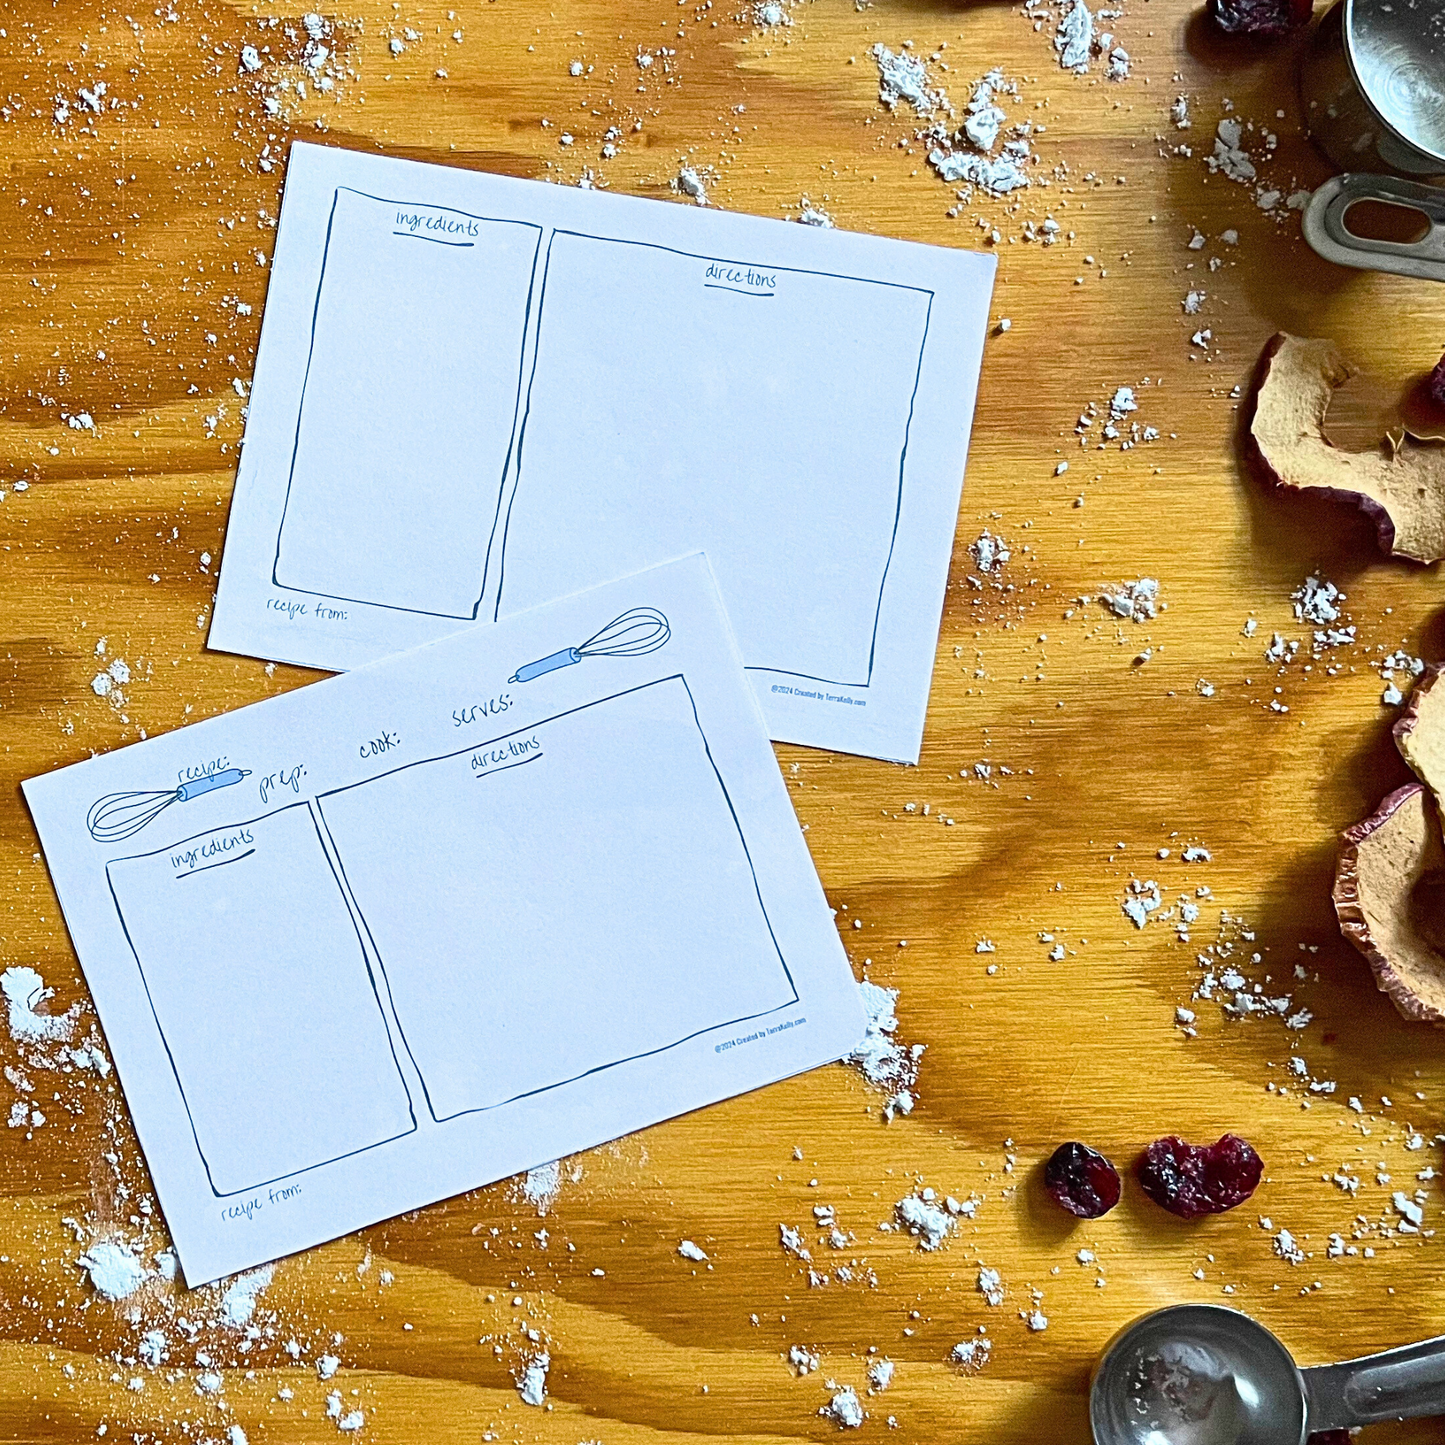 Printable Digital Recipe Card | 5 x7 and 4 x 6 inch size available to download | GoodNotes, iPad, PDF